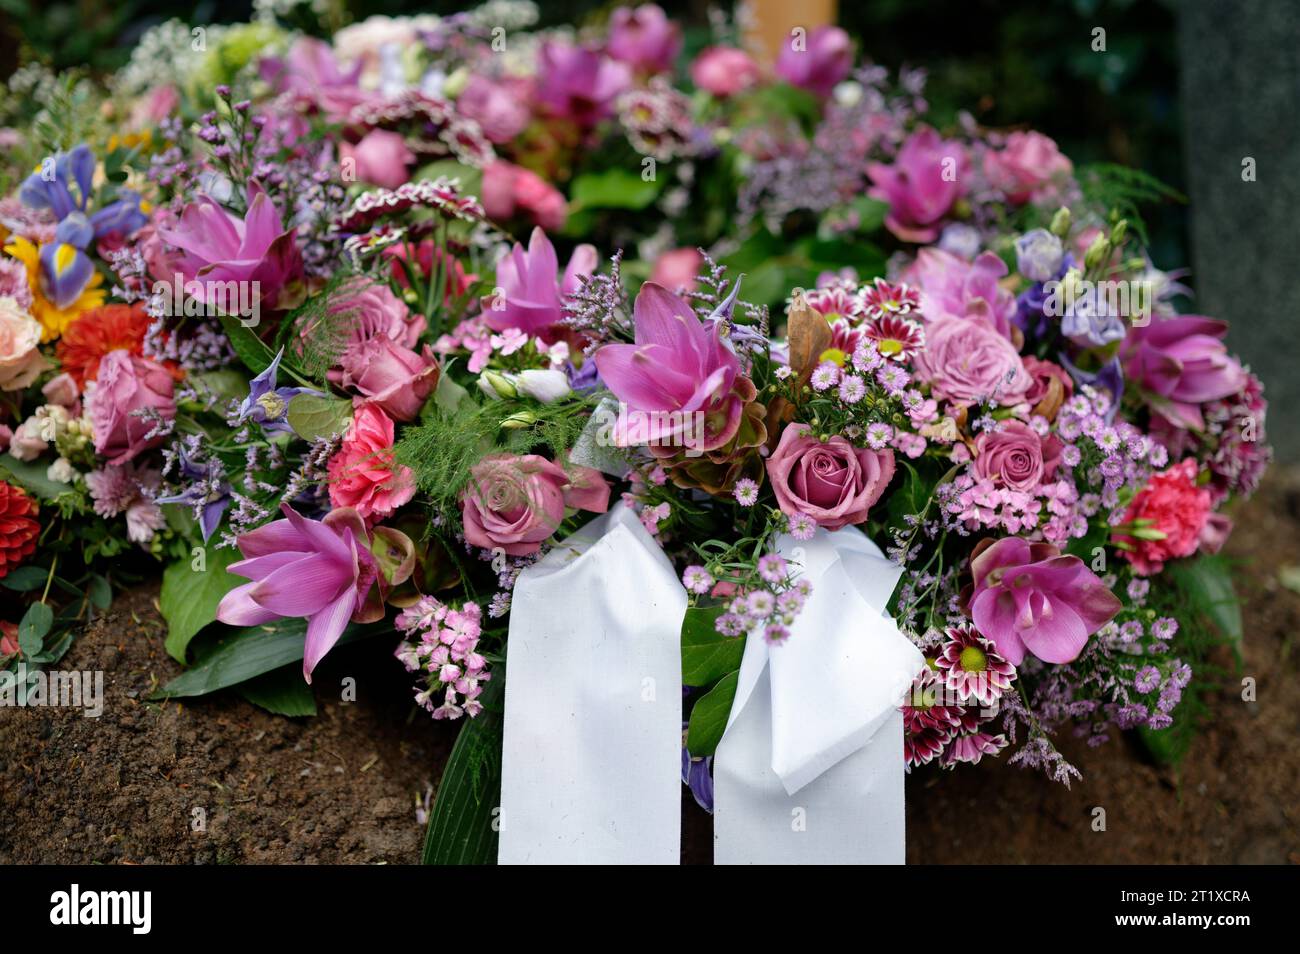 funeral wreath on a grave with white ribbons and flowers in pink tones with a wooden cross in a blurred background Stock Photo